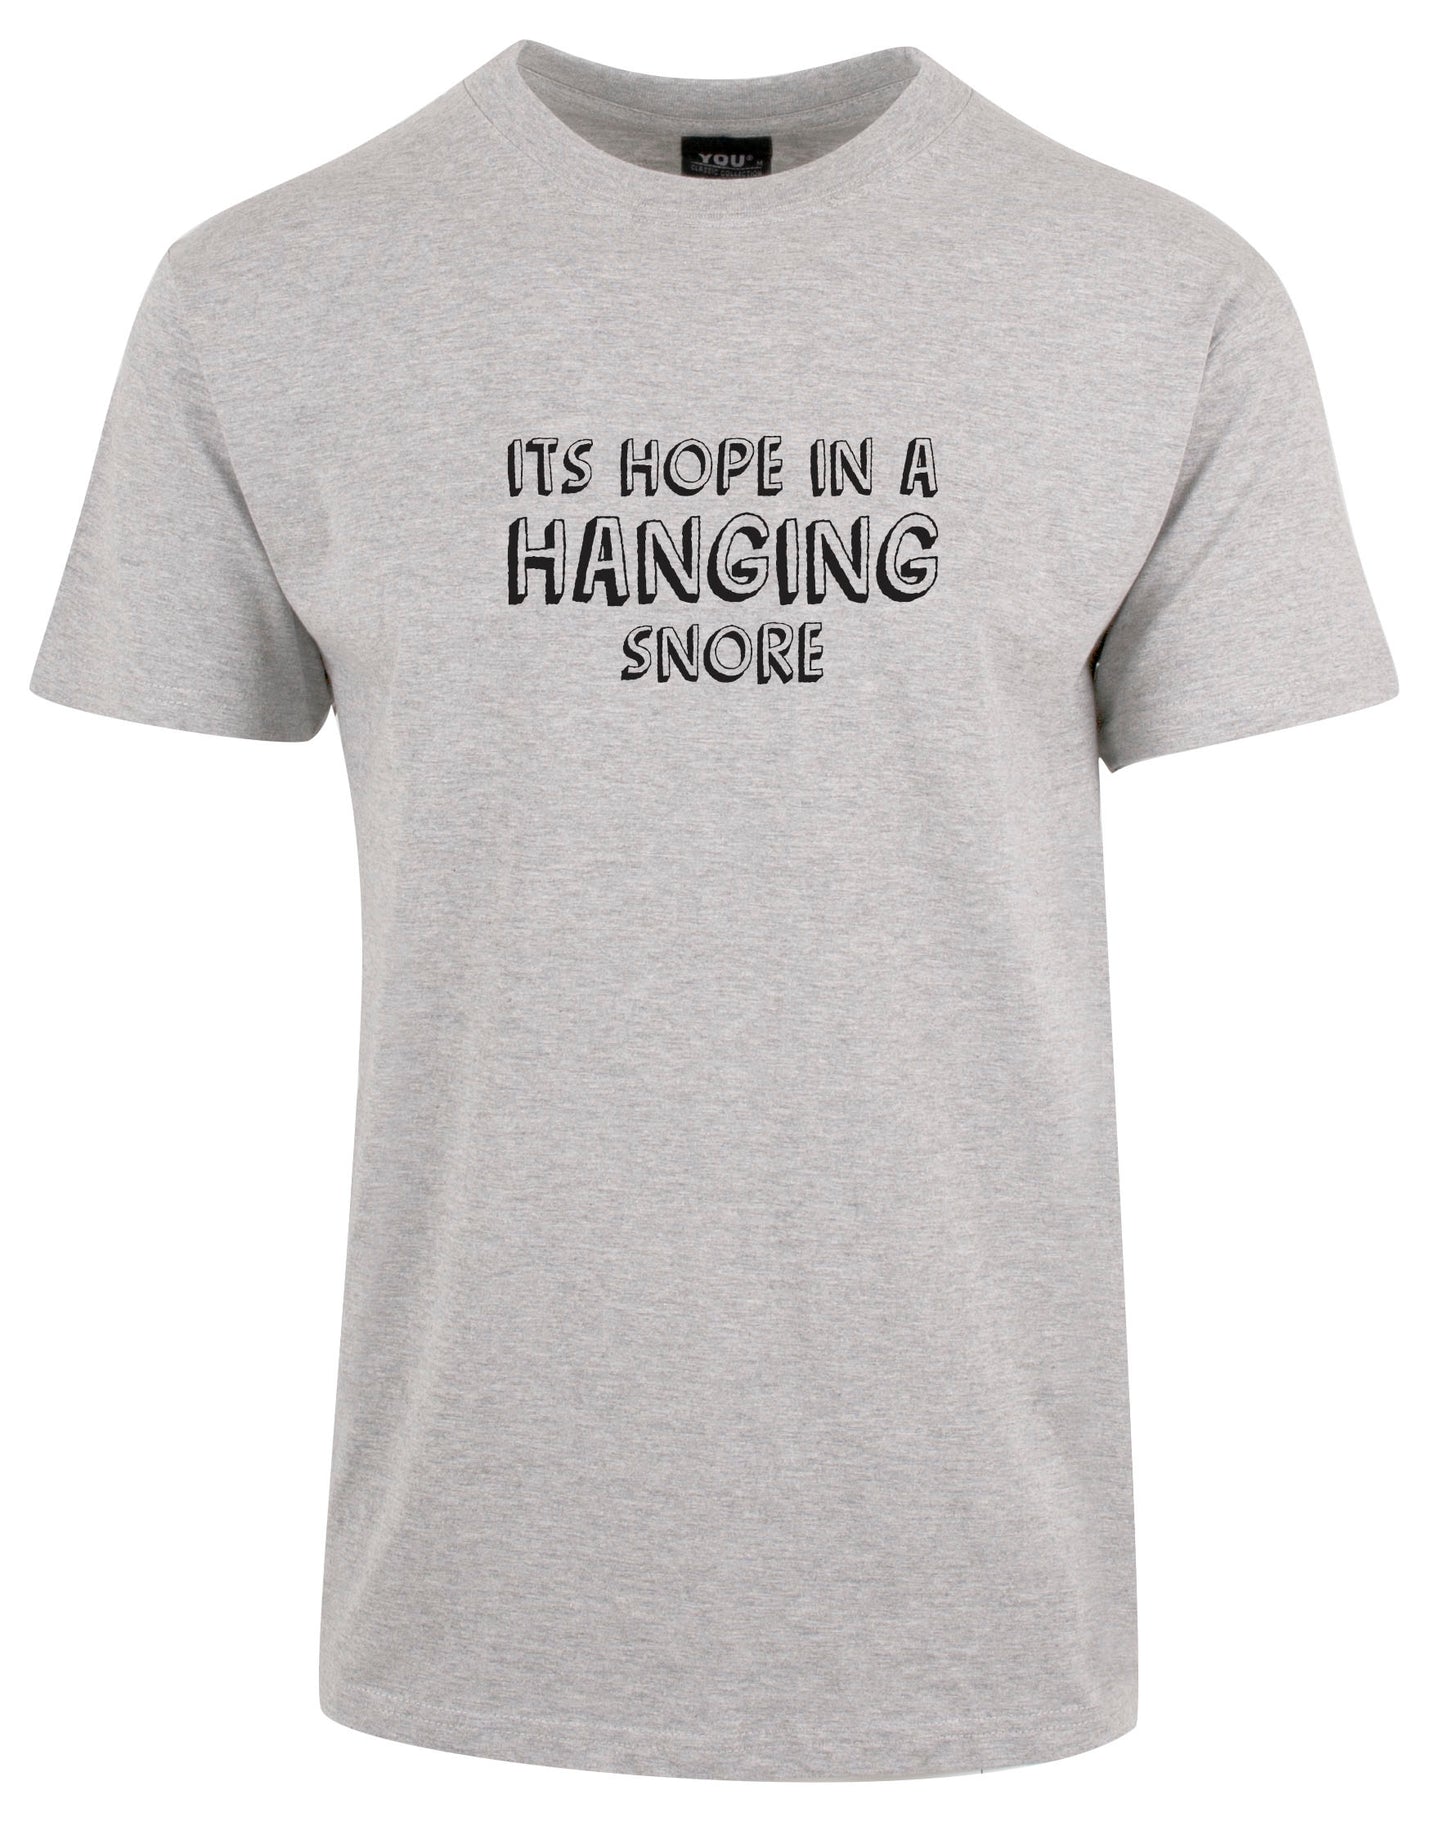 Hope in a hanging snore - T-skjorte